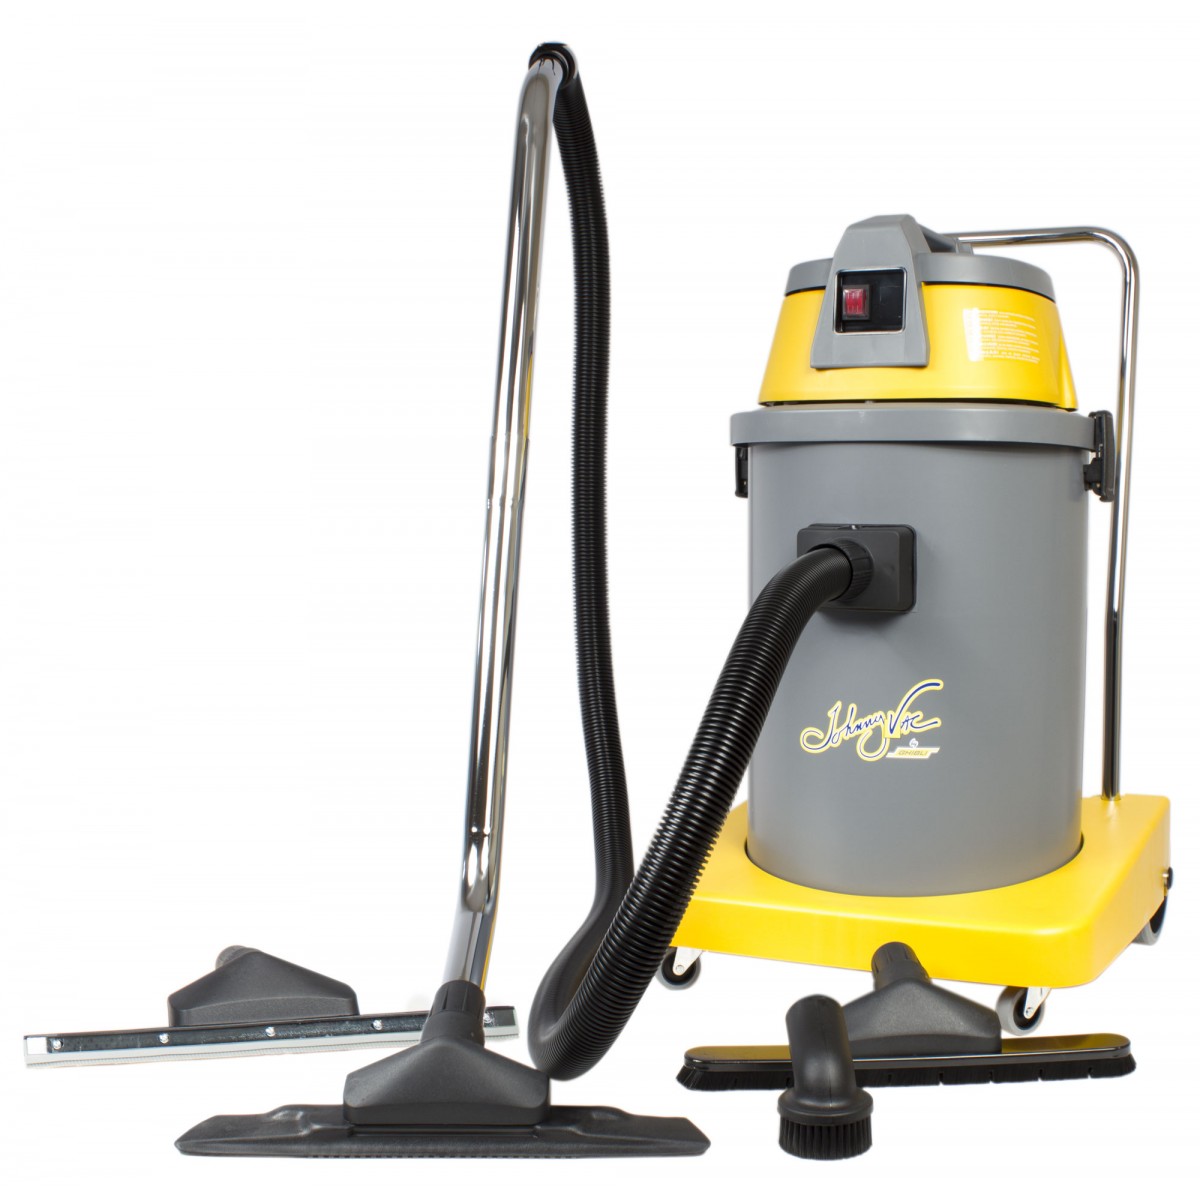 Commercial vacuums and accessories